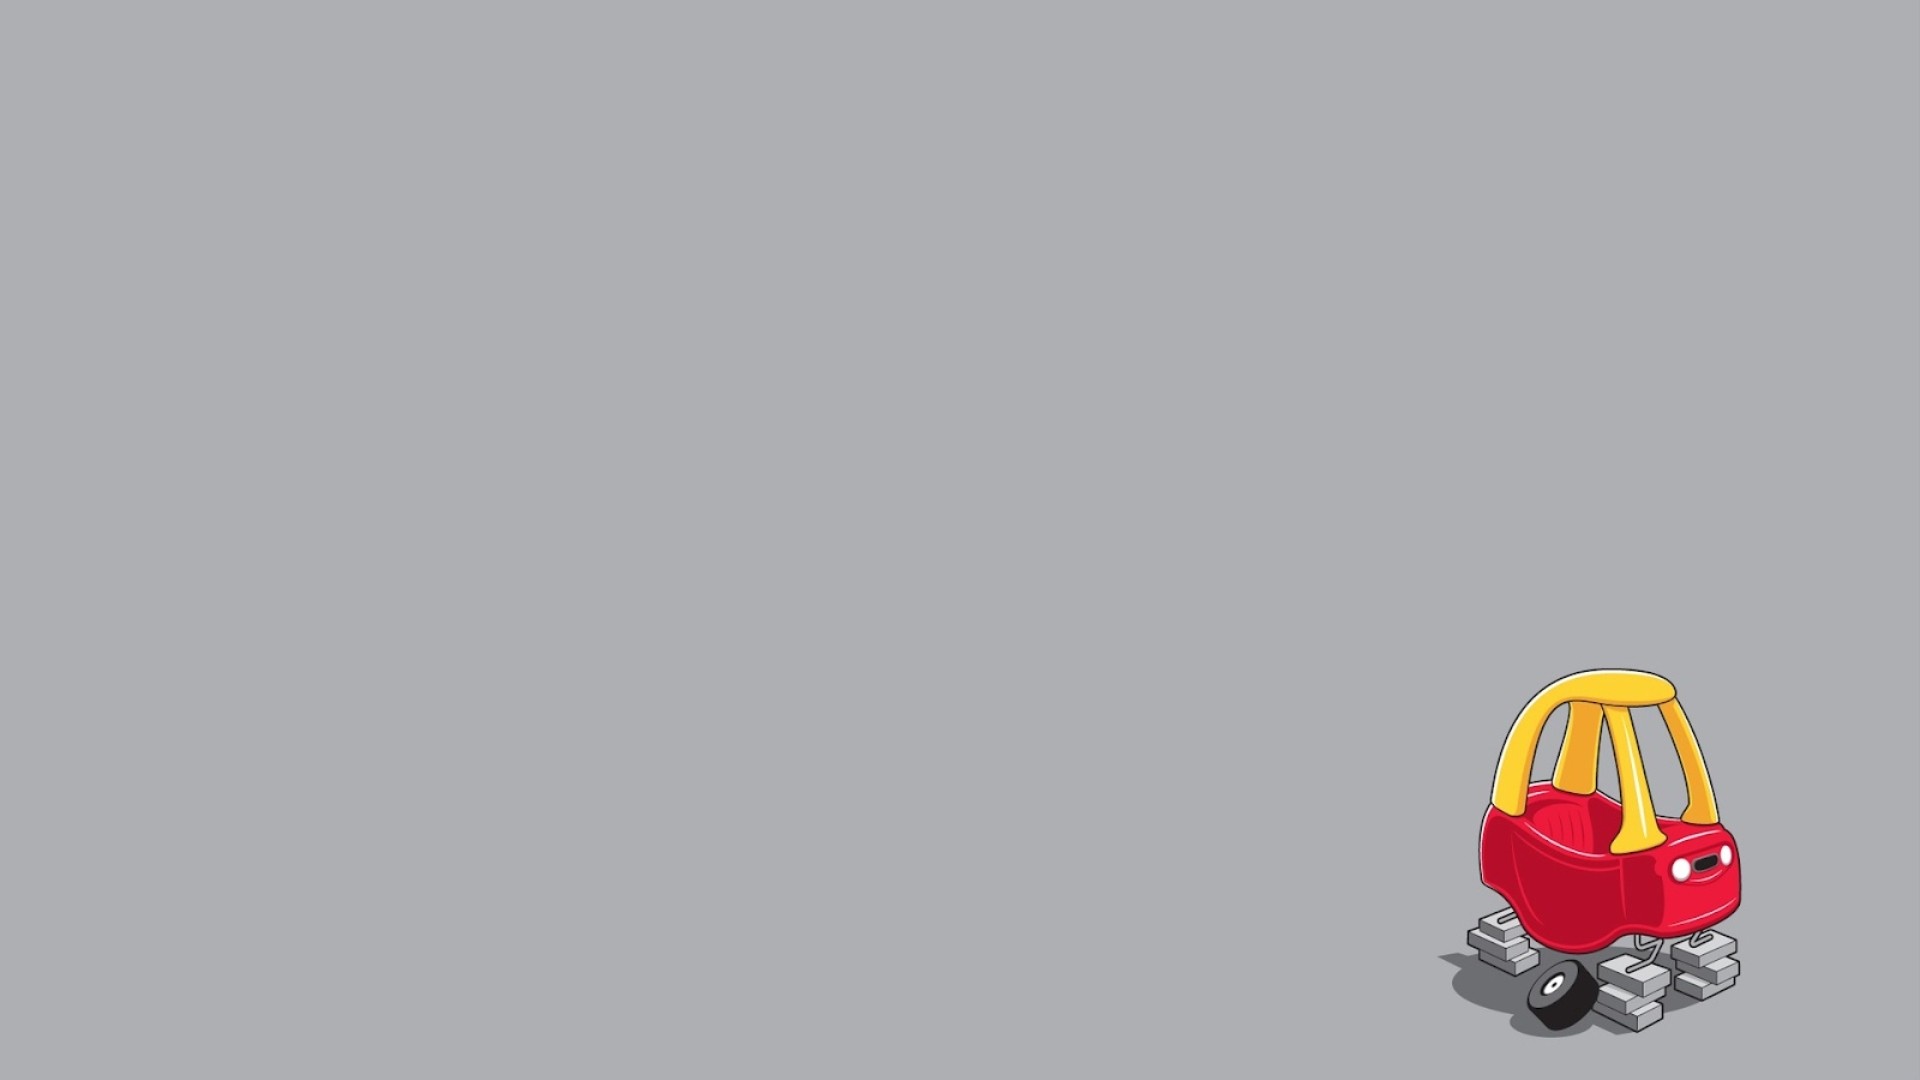 Tires Vehicle Humor Simple Background 1920x1080